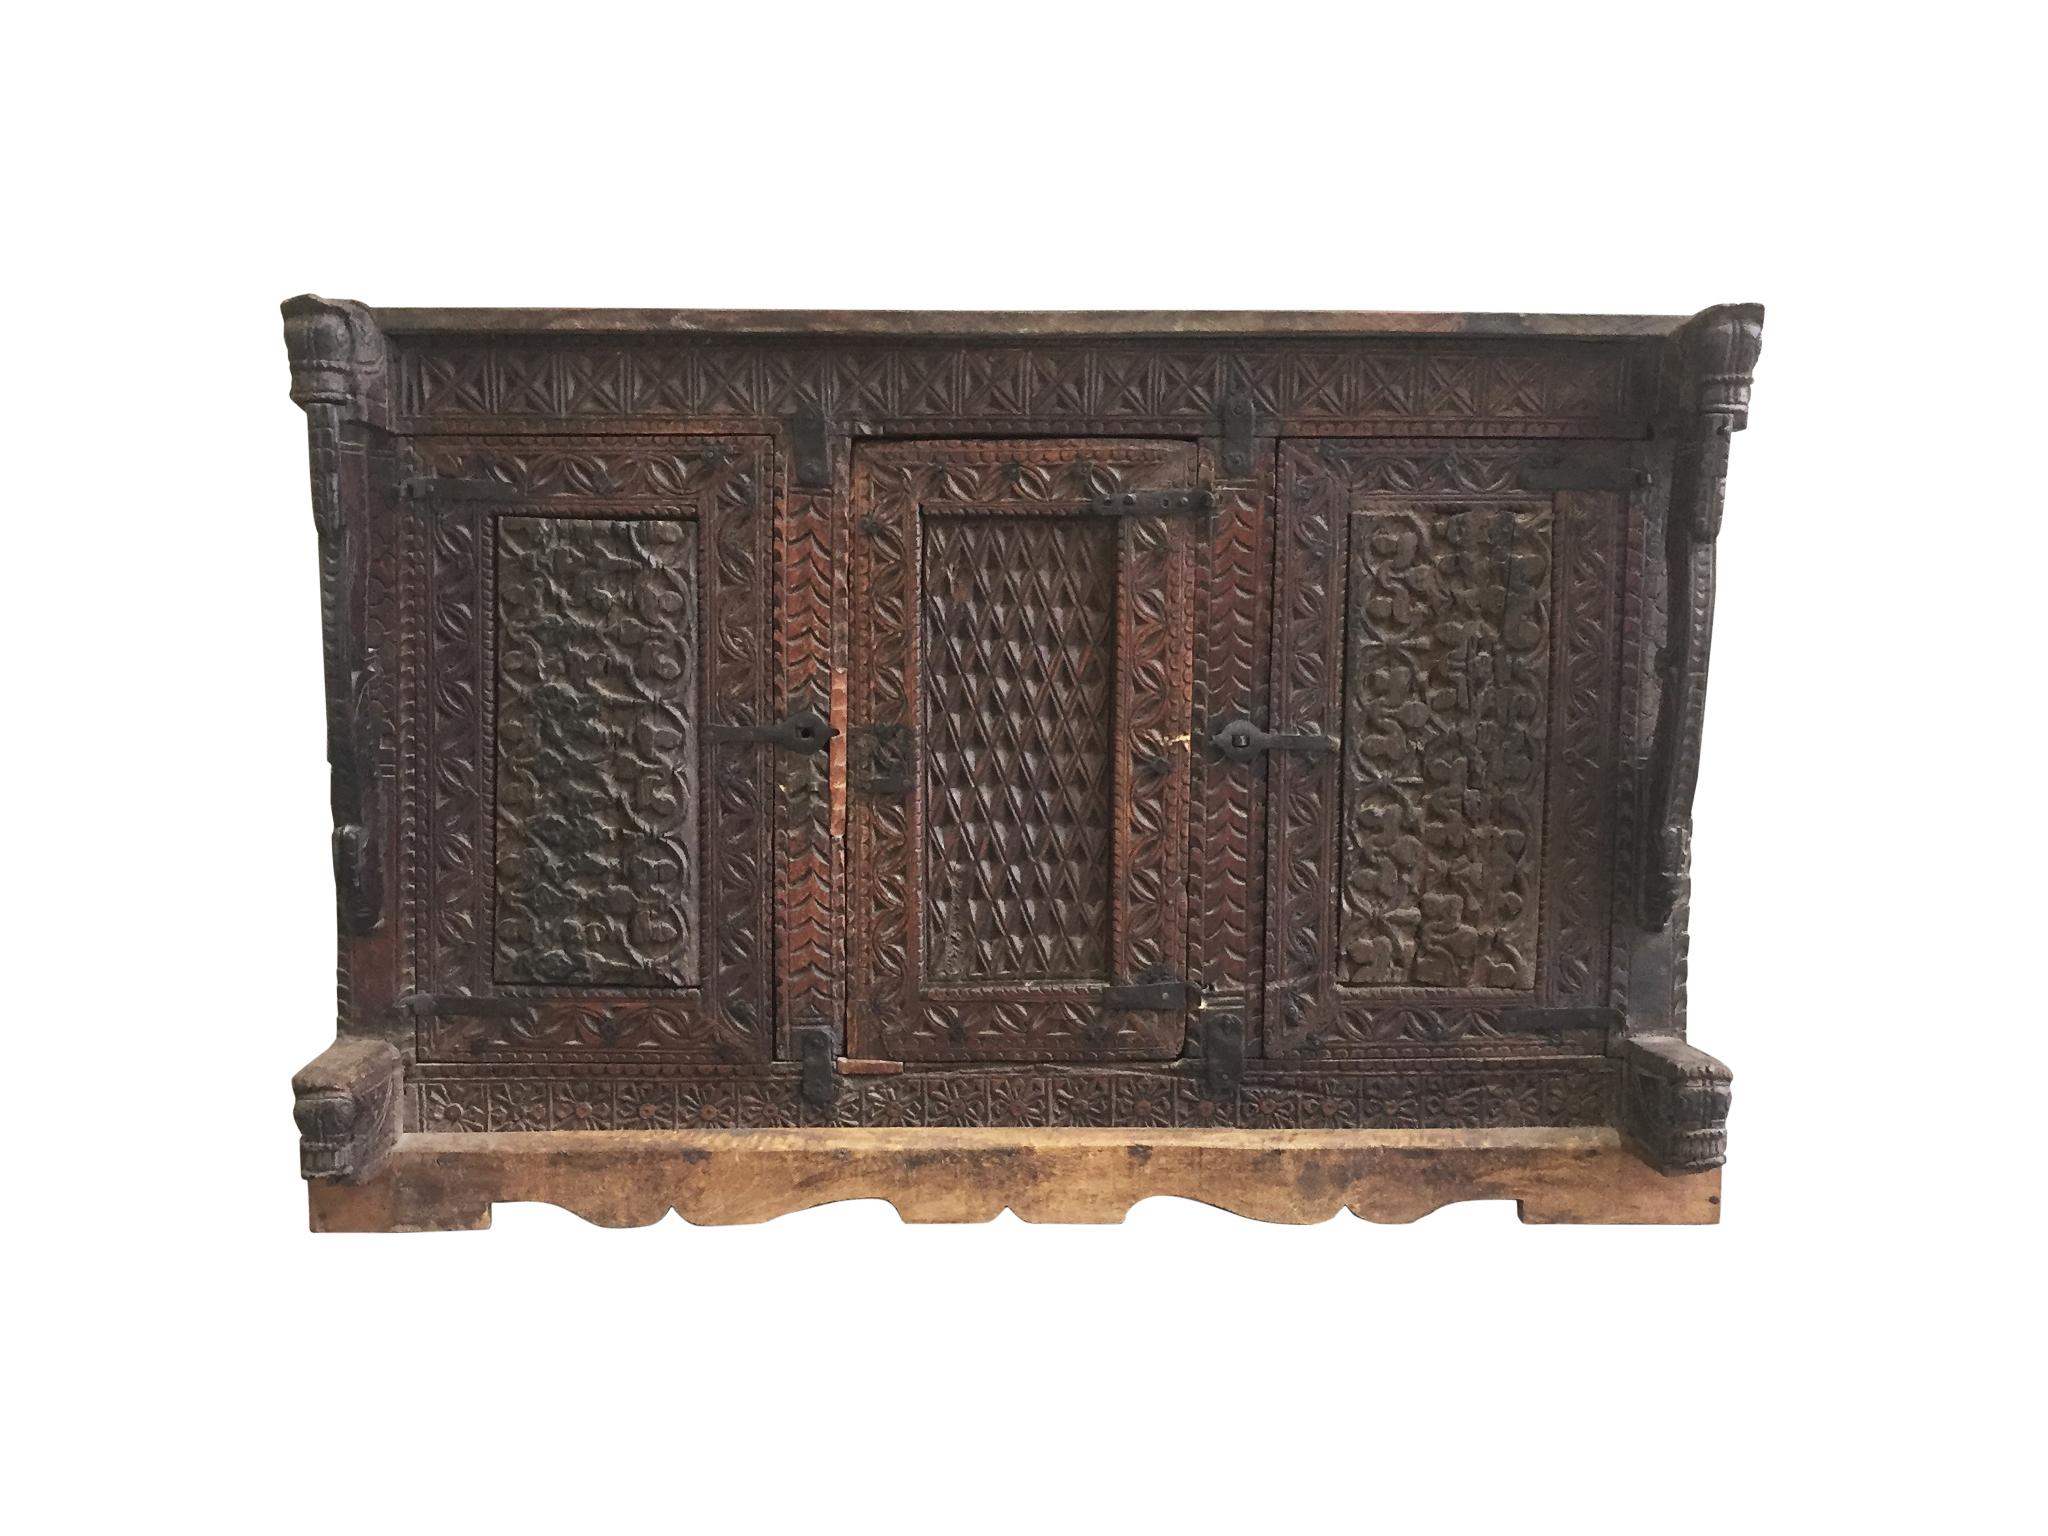 A beautifully aged Gothic Revival cabinet crafted from walnut, circa late 18th-early 19th century. The wood is a warm reddish brown. It has accrued a fine, textured surface that can only be acquired through age. The cabinet's facade is elaborately